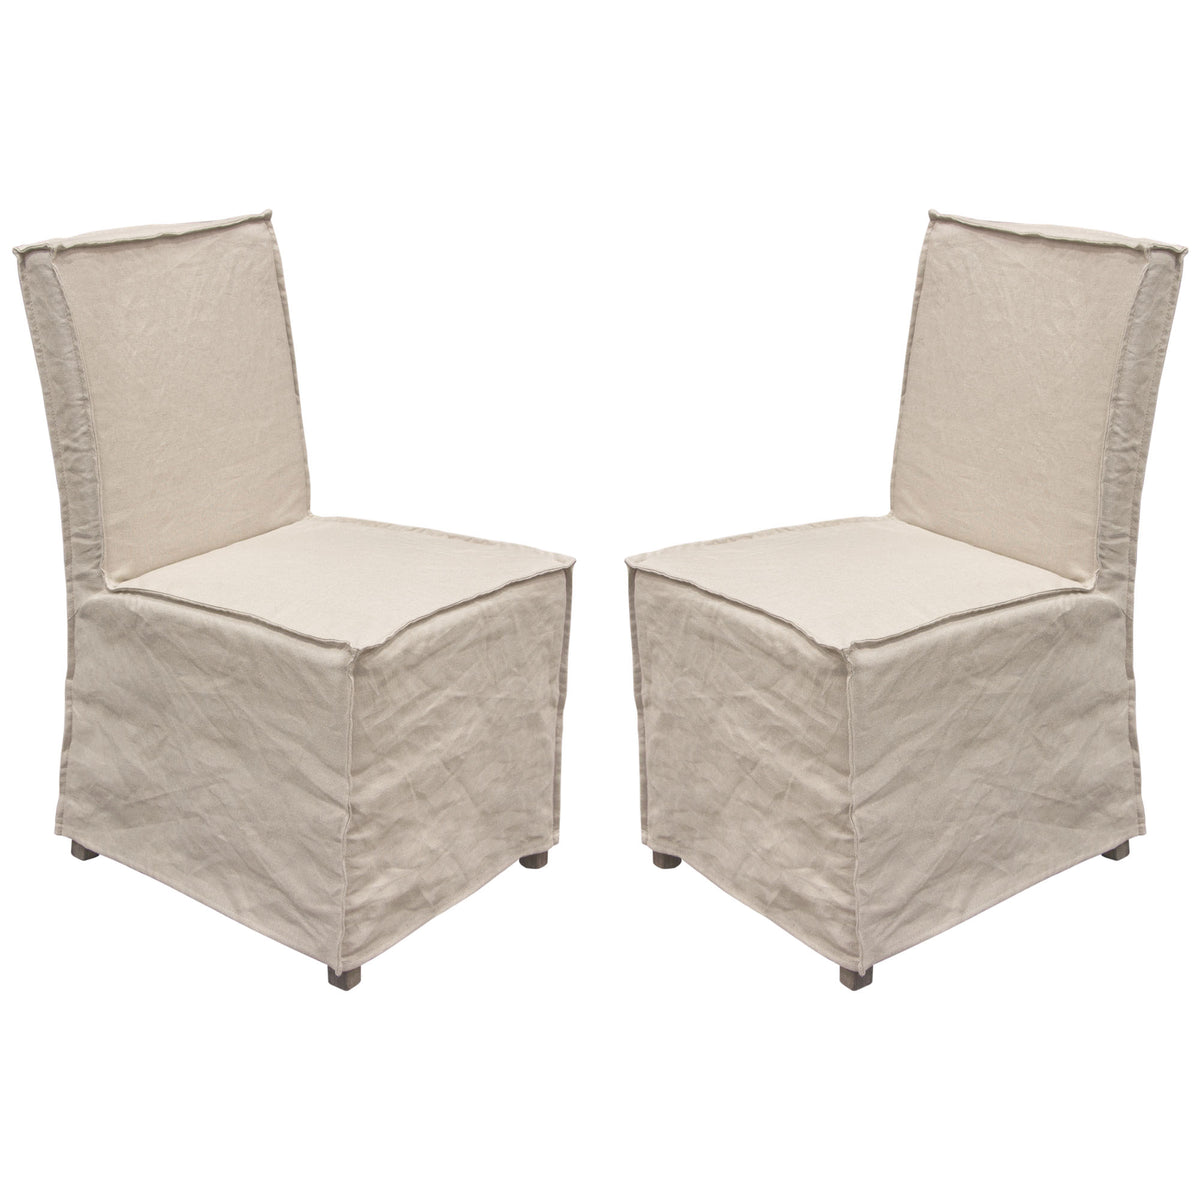 Alistair Sand Linen Removable Slipcover Chair (Set of 2)